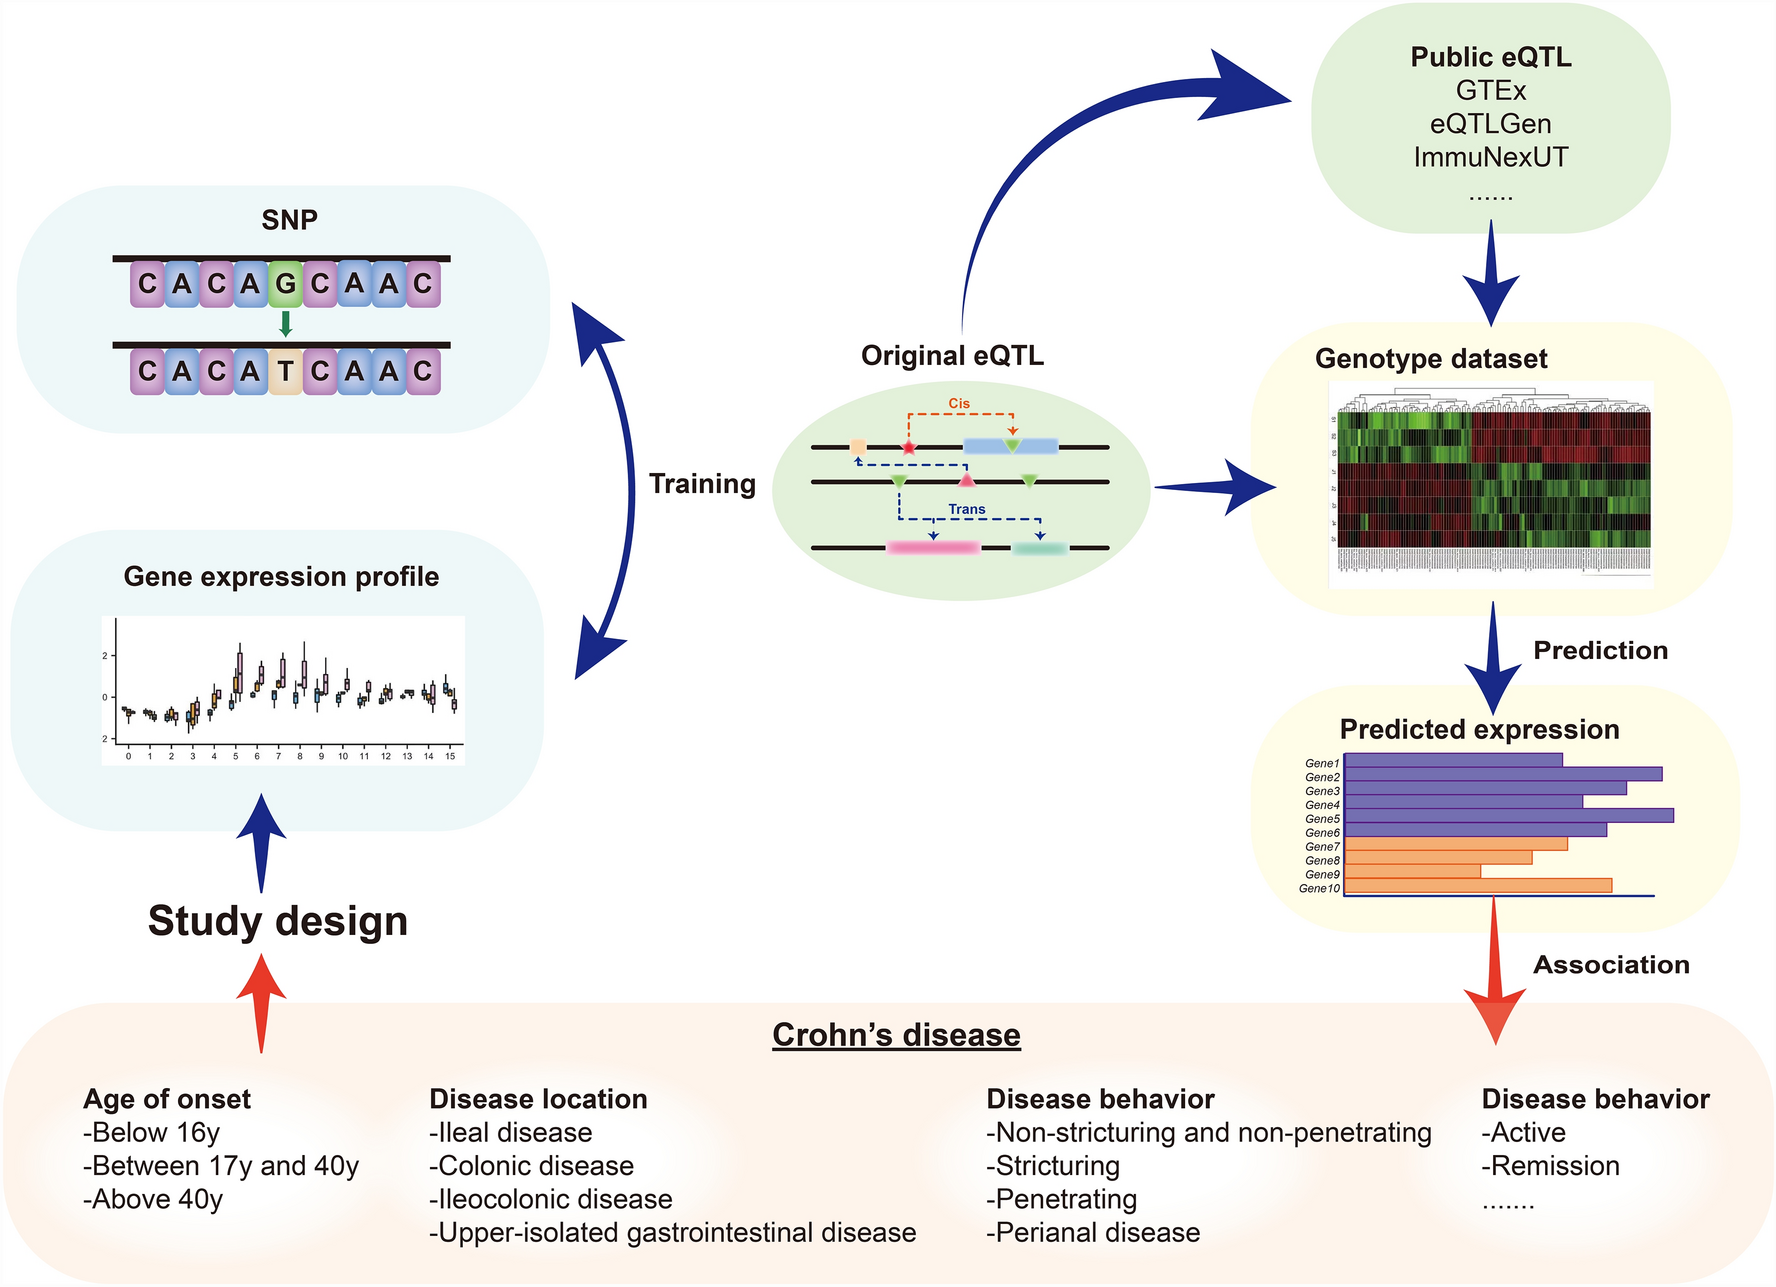 Transcriptome-wide association studies associated with Crohn’s disease: challenges and perspectives